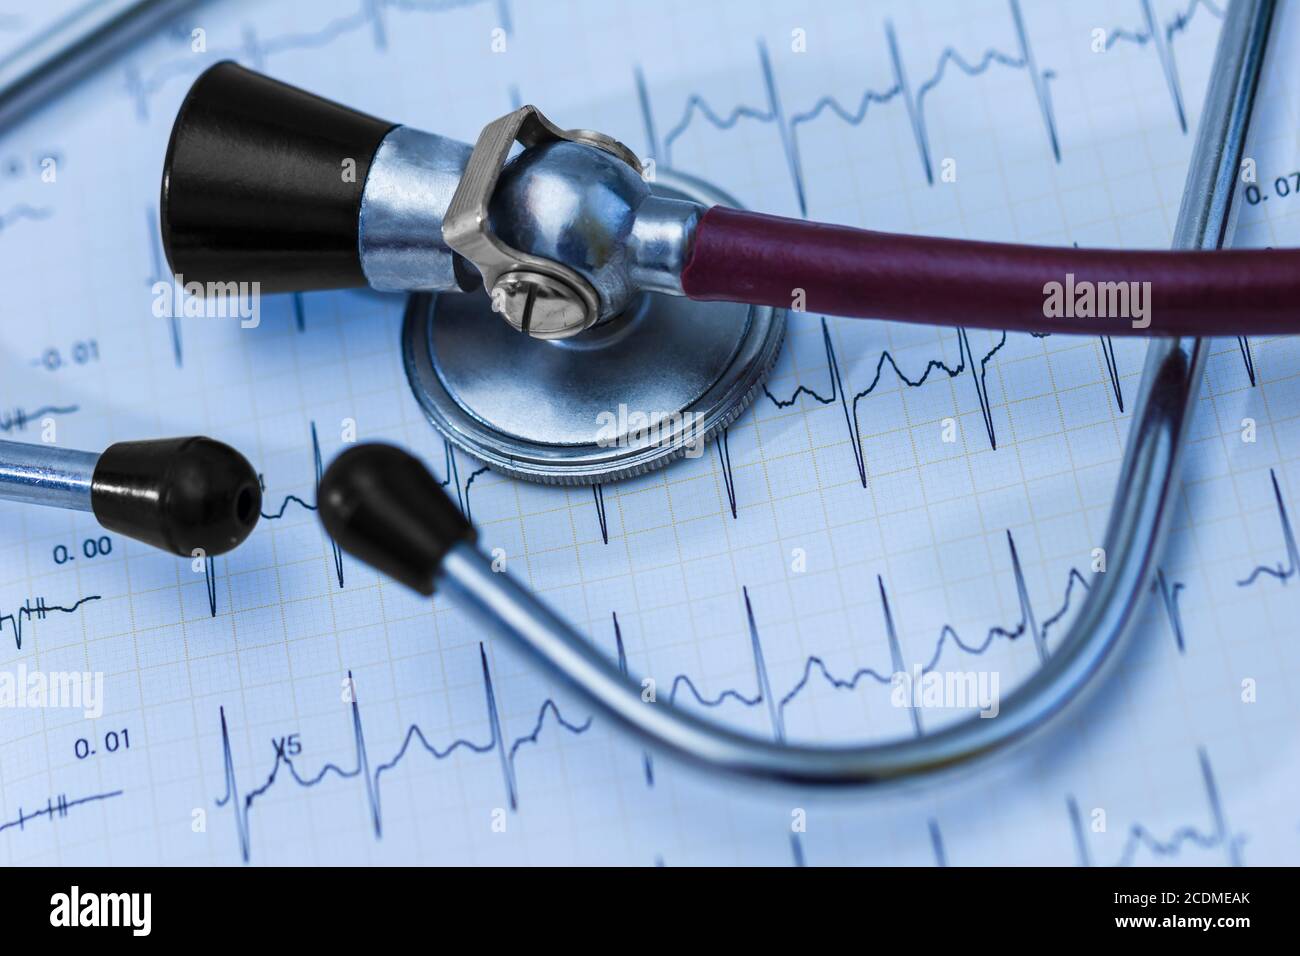 Cardiogram pulse trace and stethoscope concept for cardiovascular medical exam Stock Photo